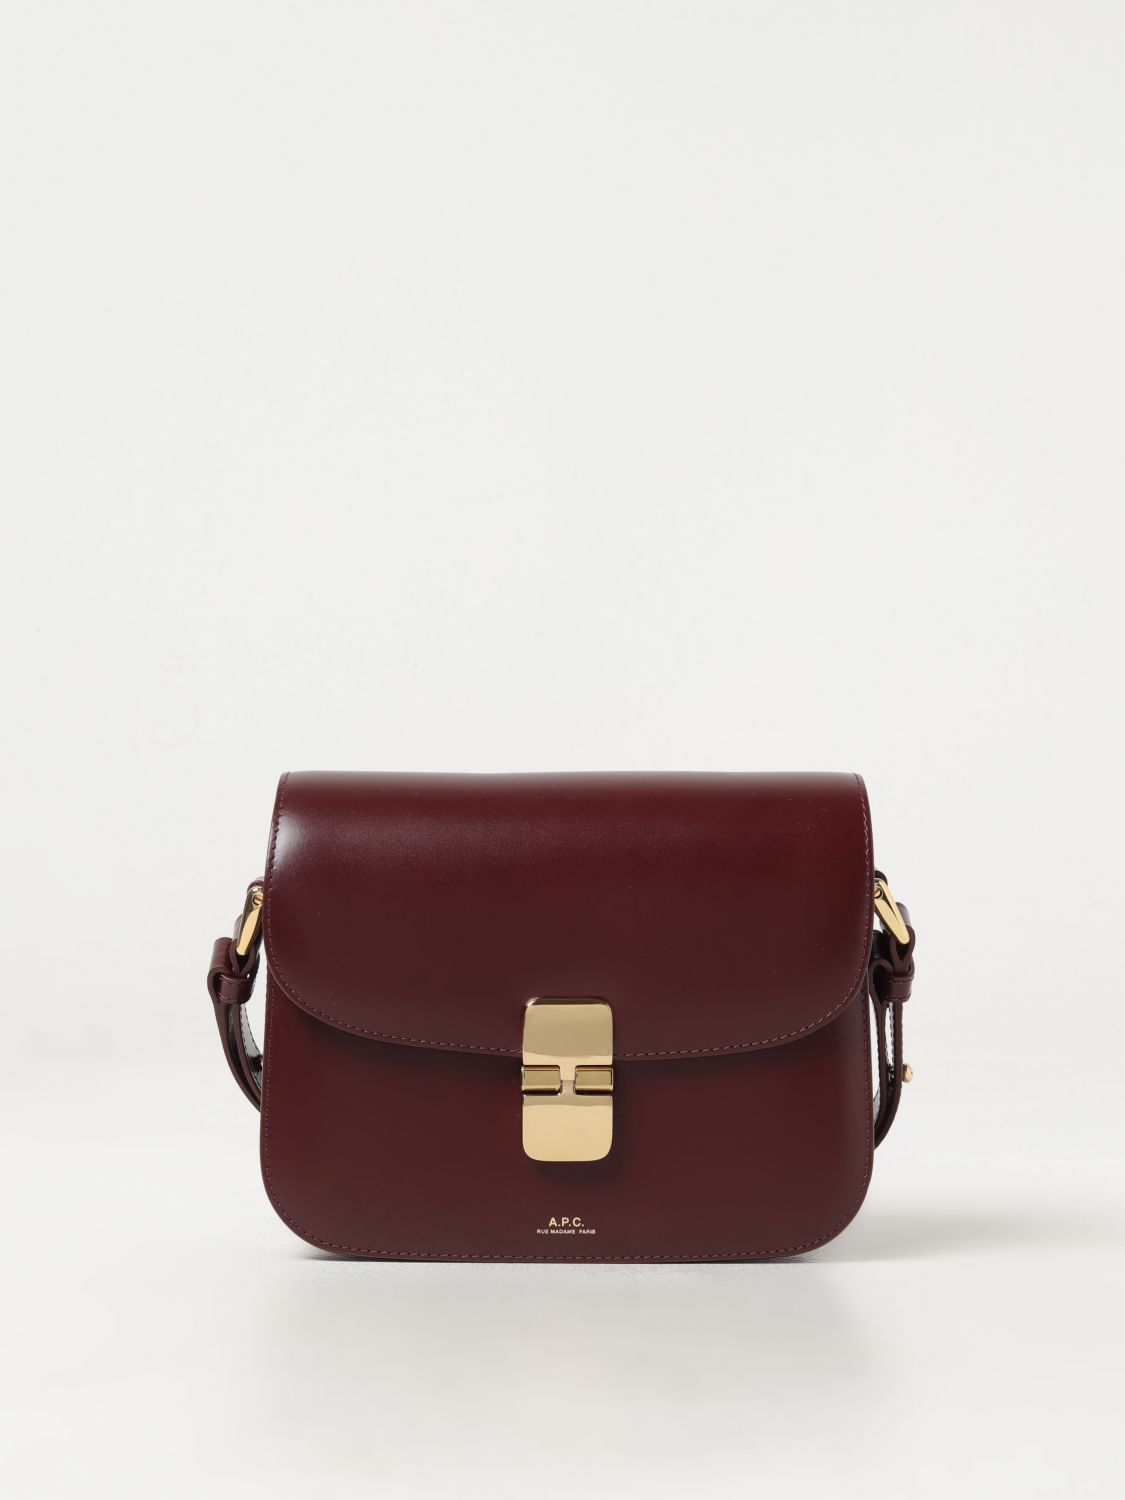 Apc A.p.c. Grace Leather Bag In Burgundy